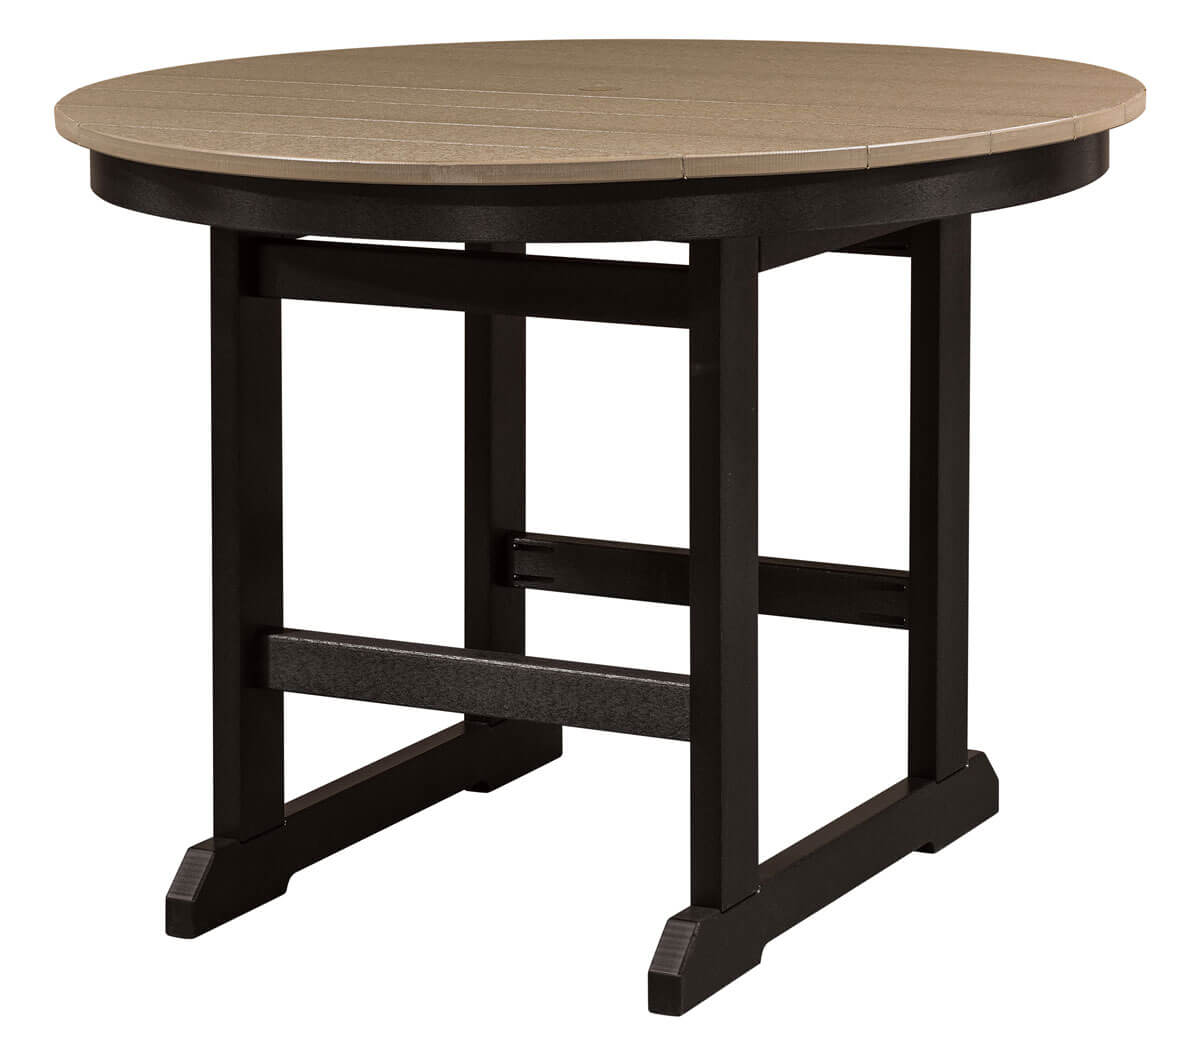 EC Woods Westbrook Outdoor Poly Dining Height 48 Inch Table Shown in Weathered Wood and Black